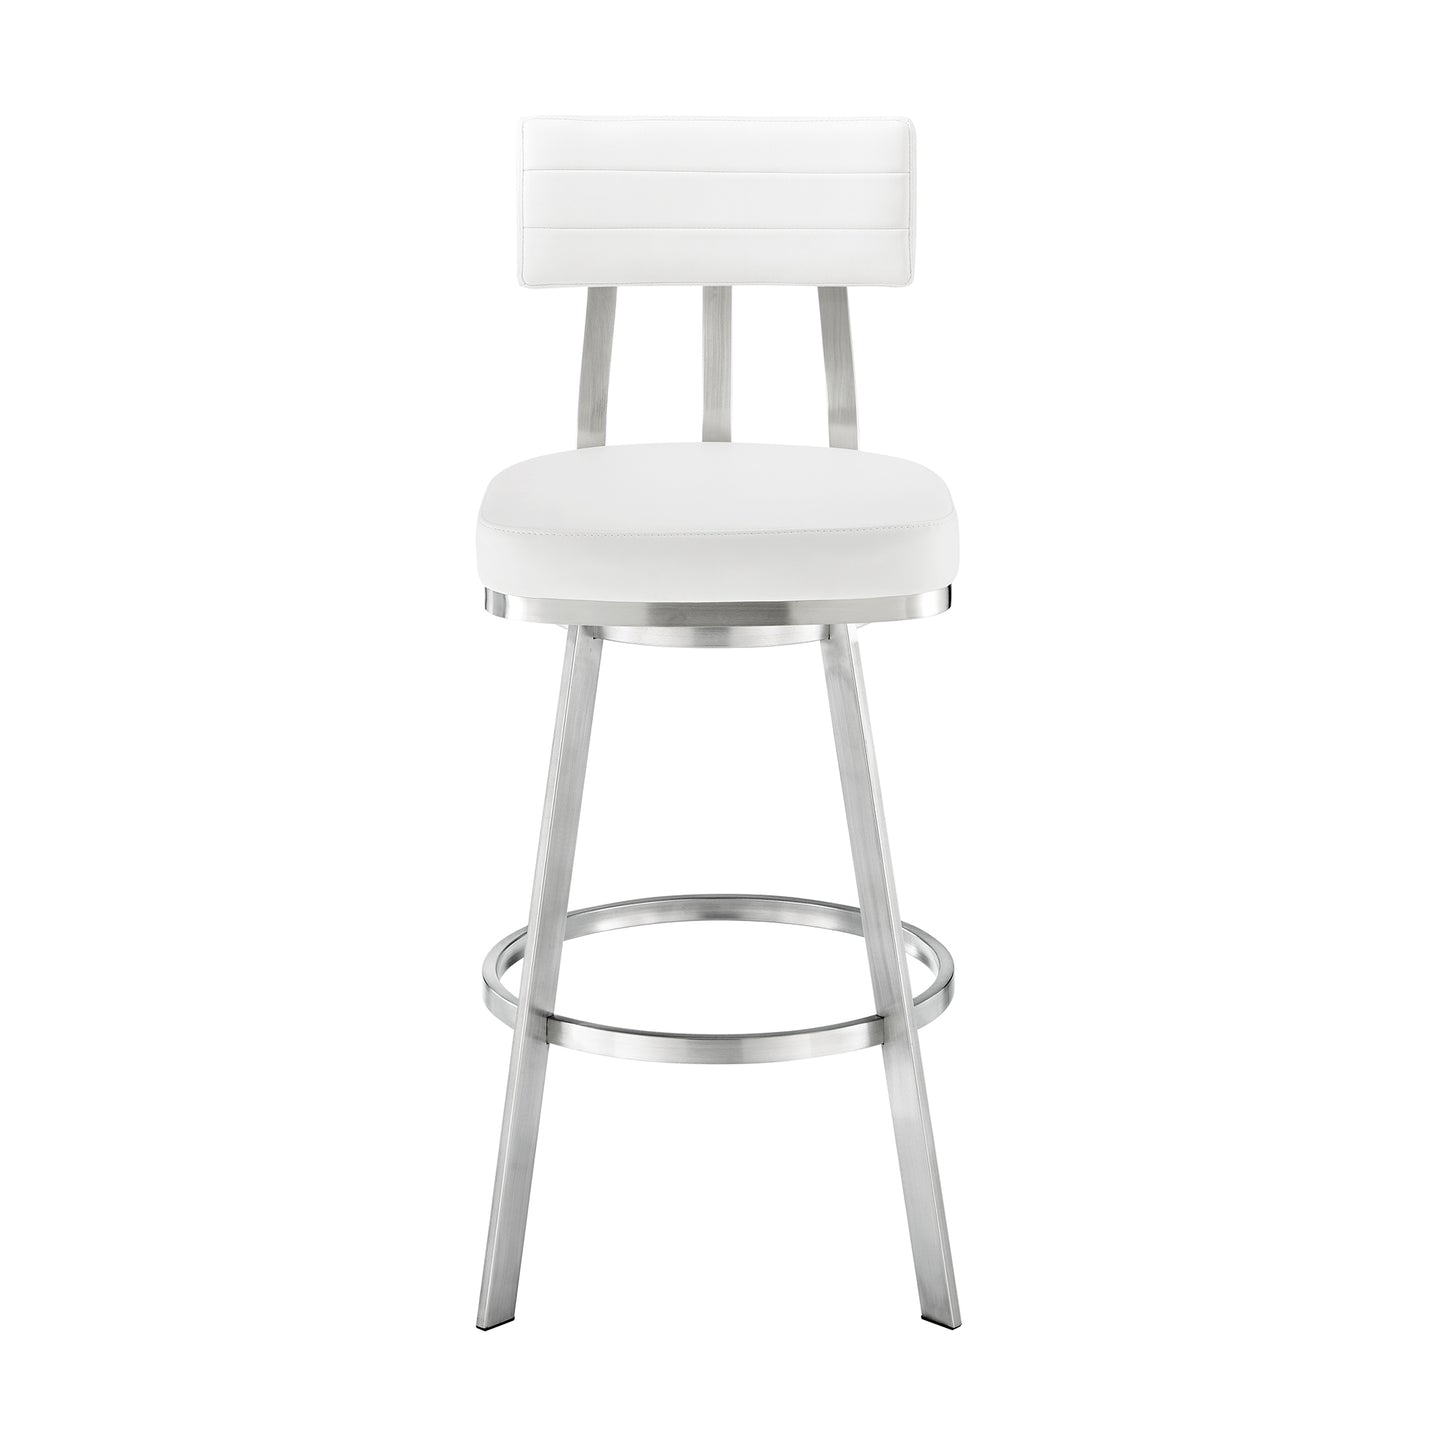 Benjamin 30" Swivel Bar Stool in Brushed Stainless Steel with White Faux Leather